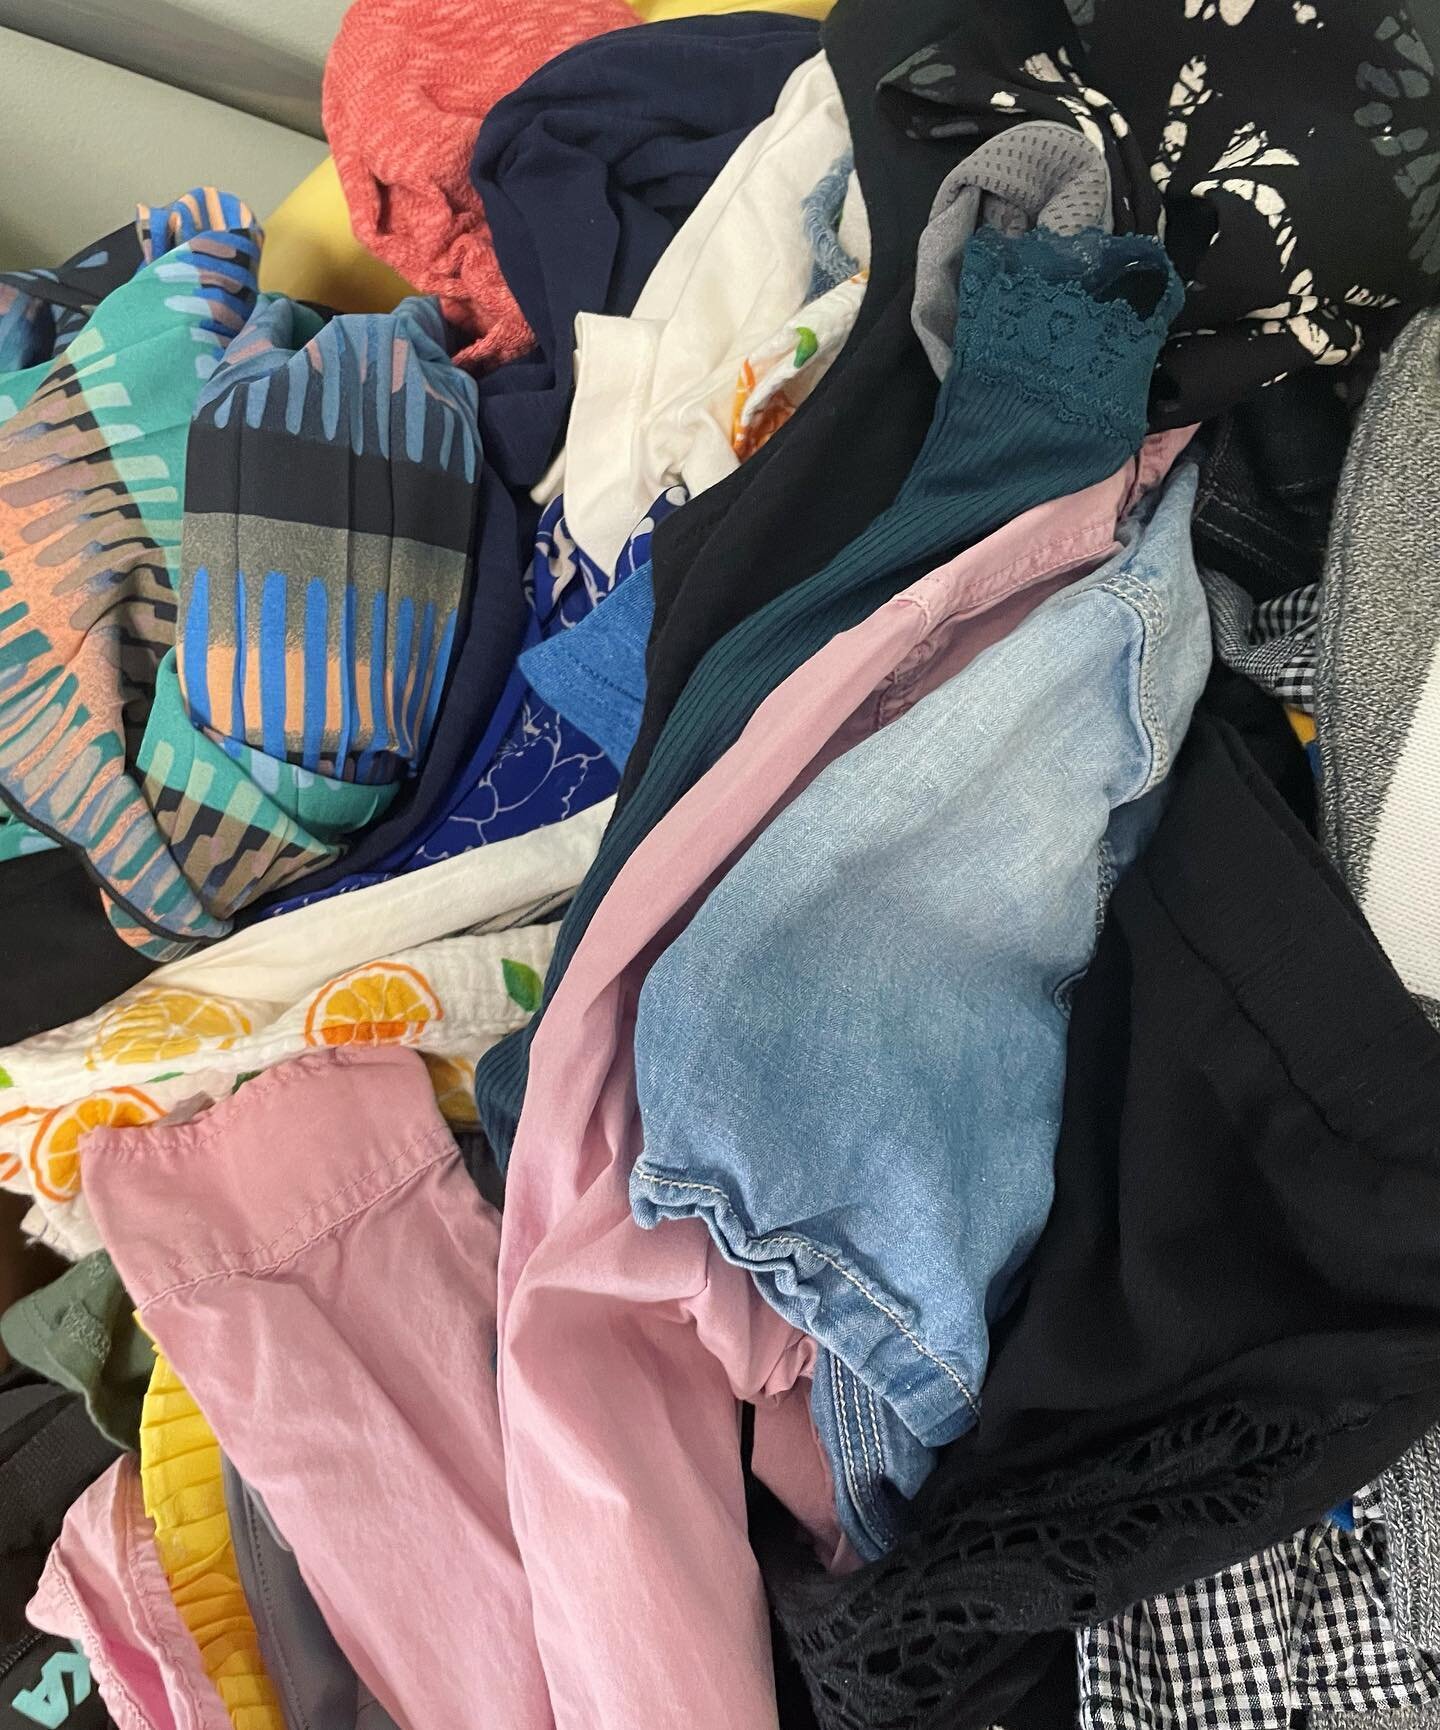 This random pile may by all means appear messy and unassuming, but trust me when I say that in it hold the keys to your new summer wardrobe&hellip;.

#summerwardrobe #anthropologie 
#loveourcustomers 
#bohostyle #ecofriendlyfashion #springvibes 
#san